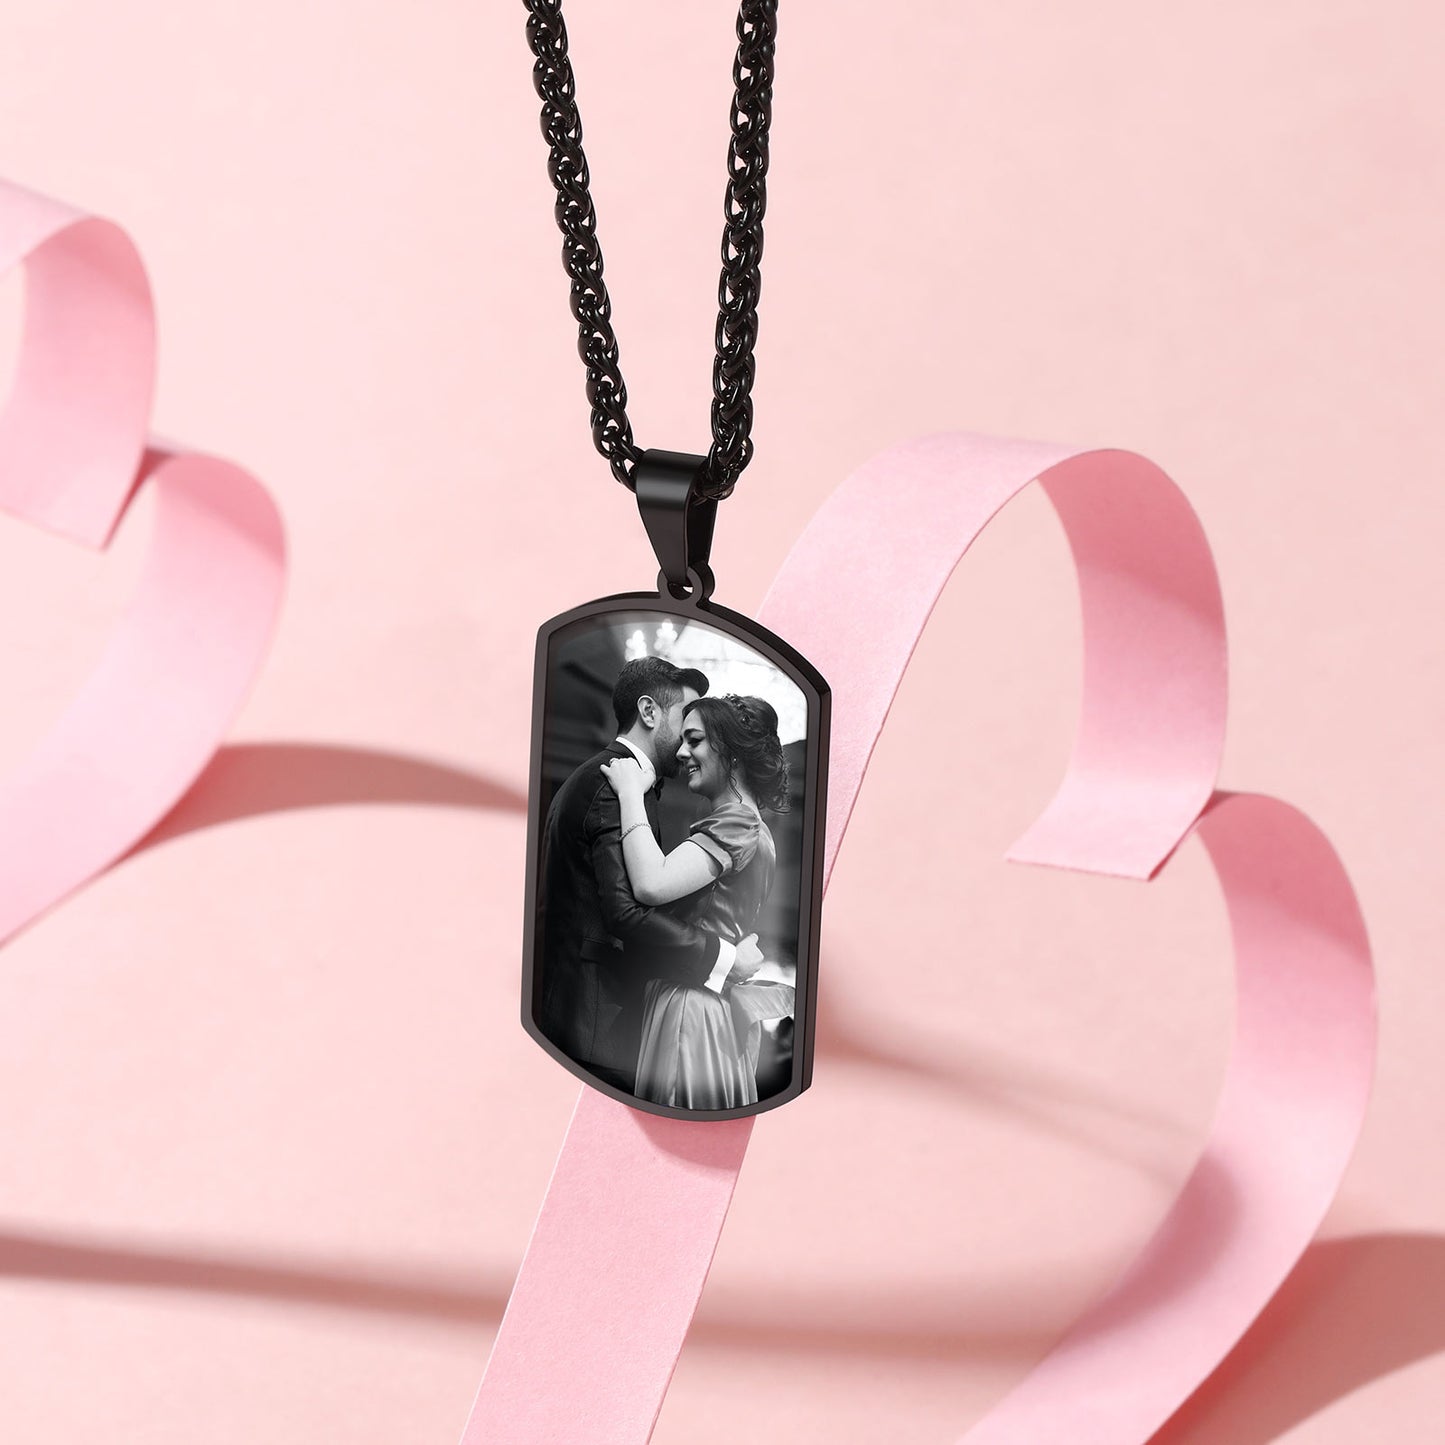 Personalized Dog Tag Picture Necklace for Men Women